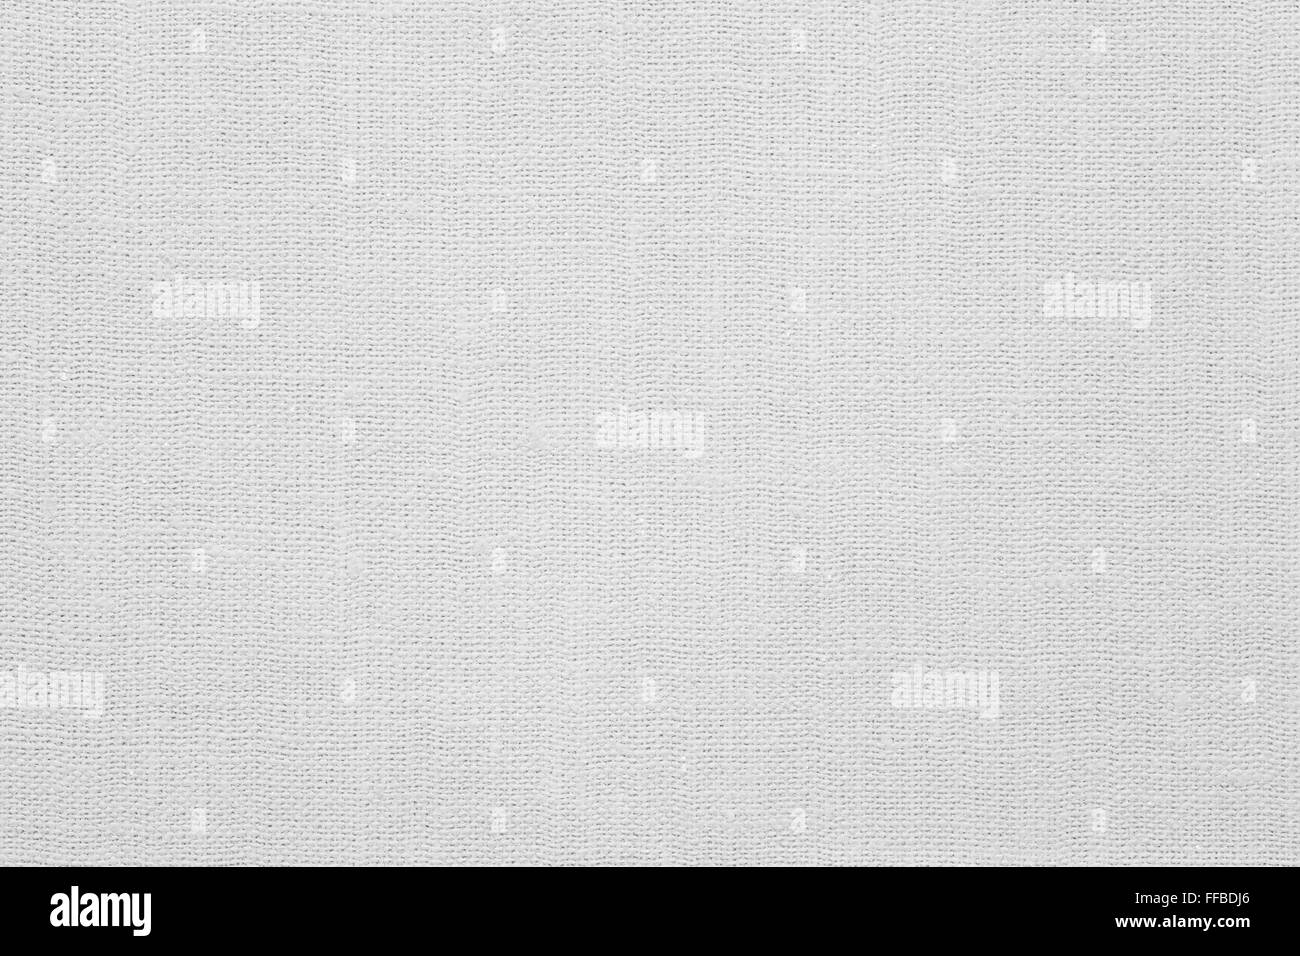 white linen background or woven canvas texture Stock Photo